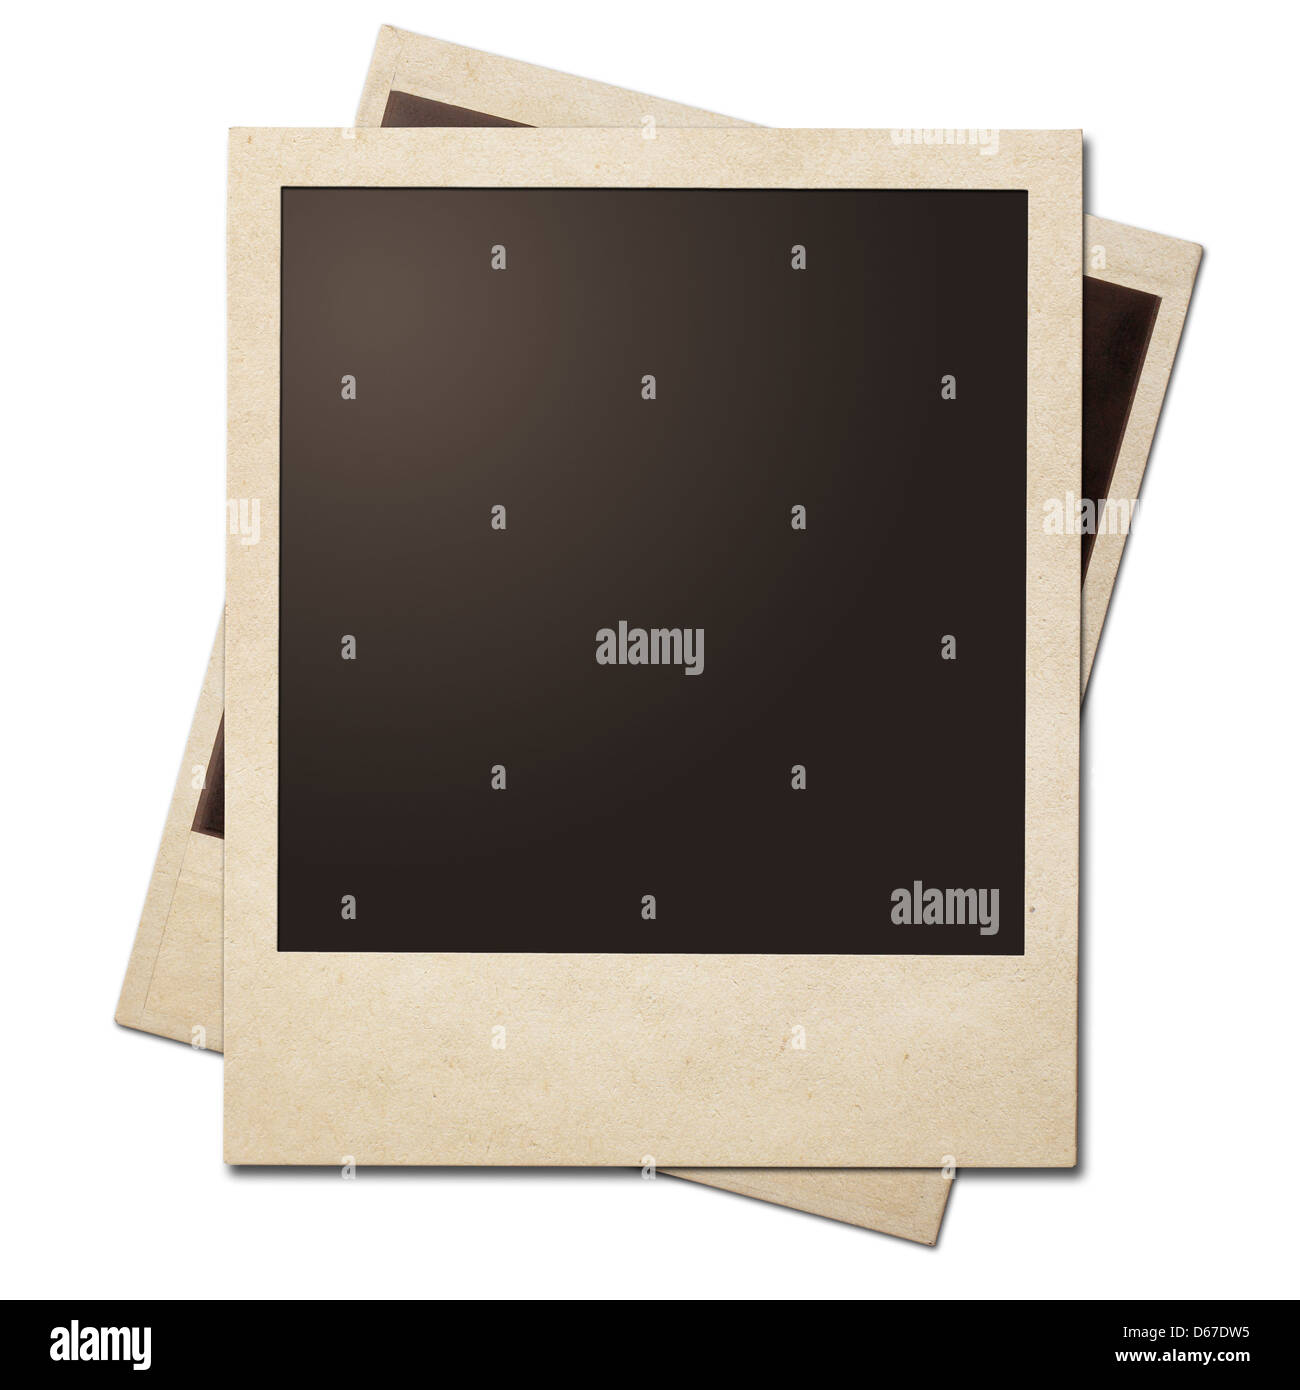 Vintage instant photo polaroid frames isolated. Clipping path without shadows is included. Stock Photo